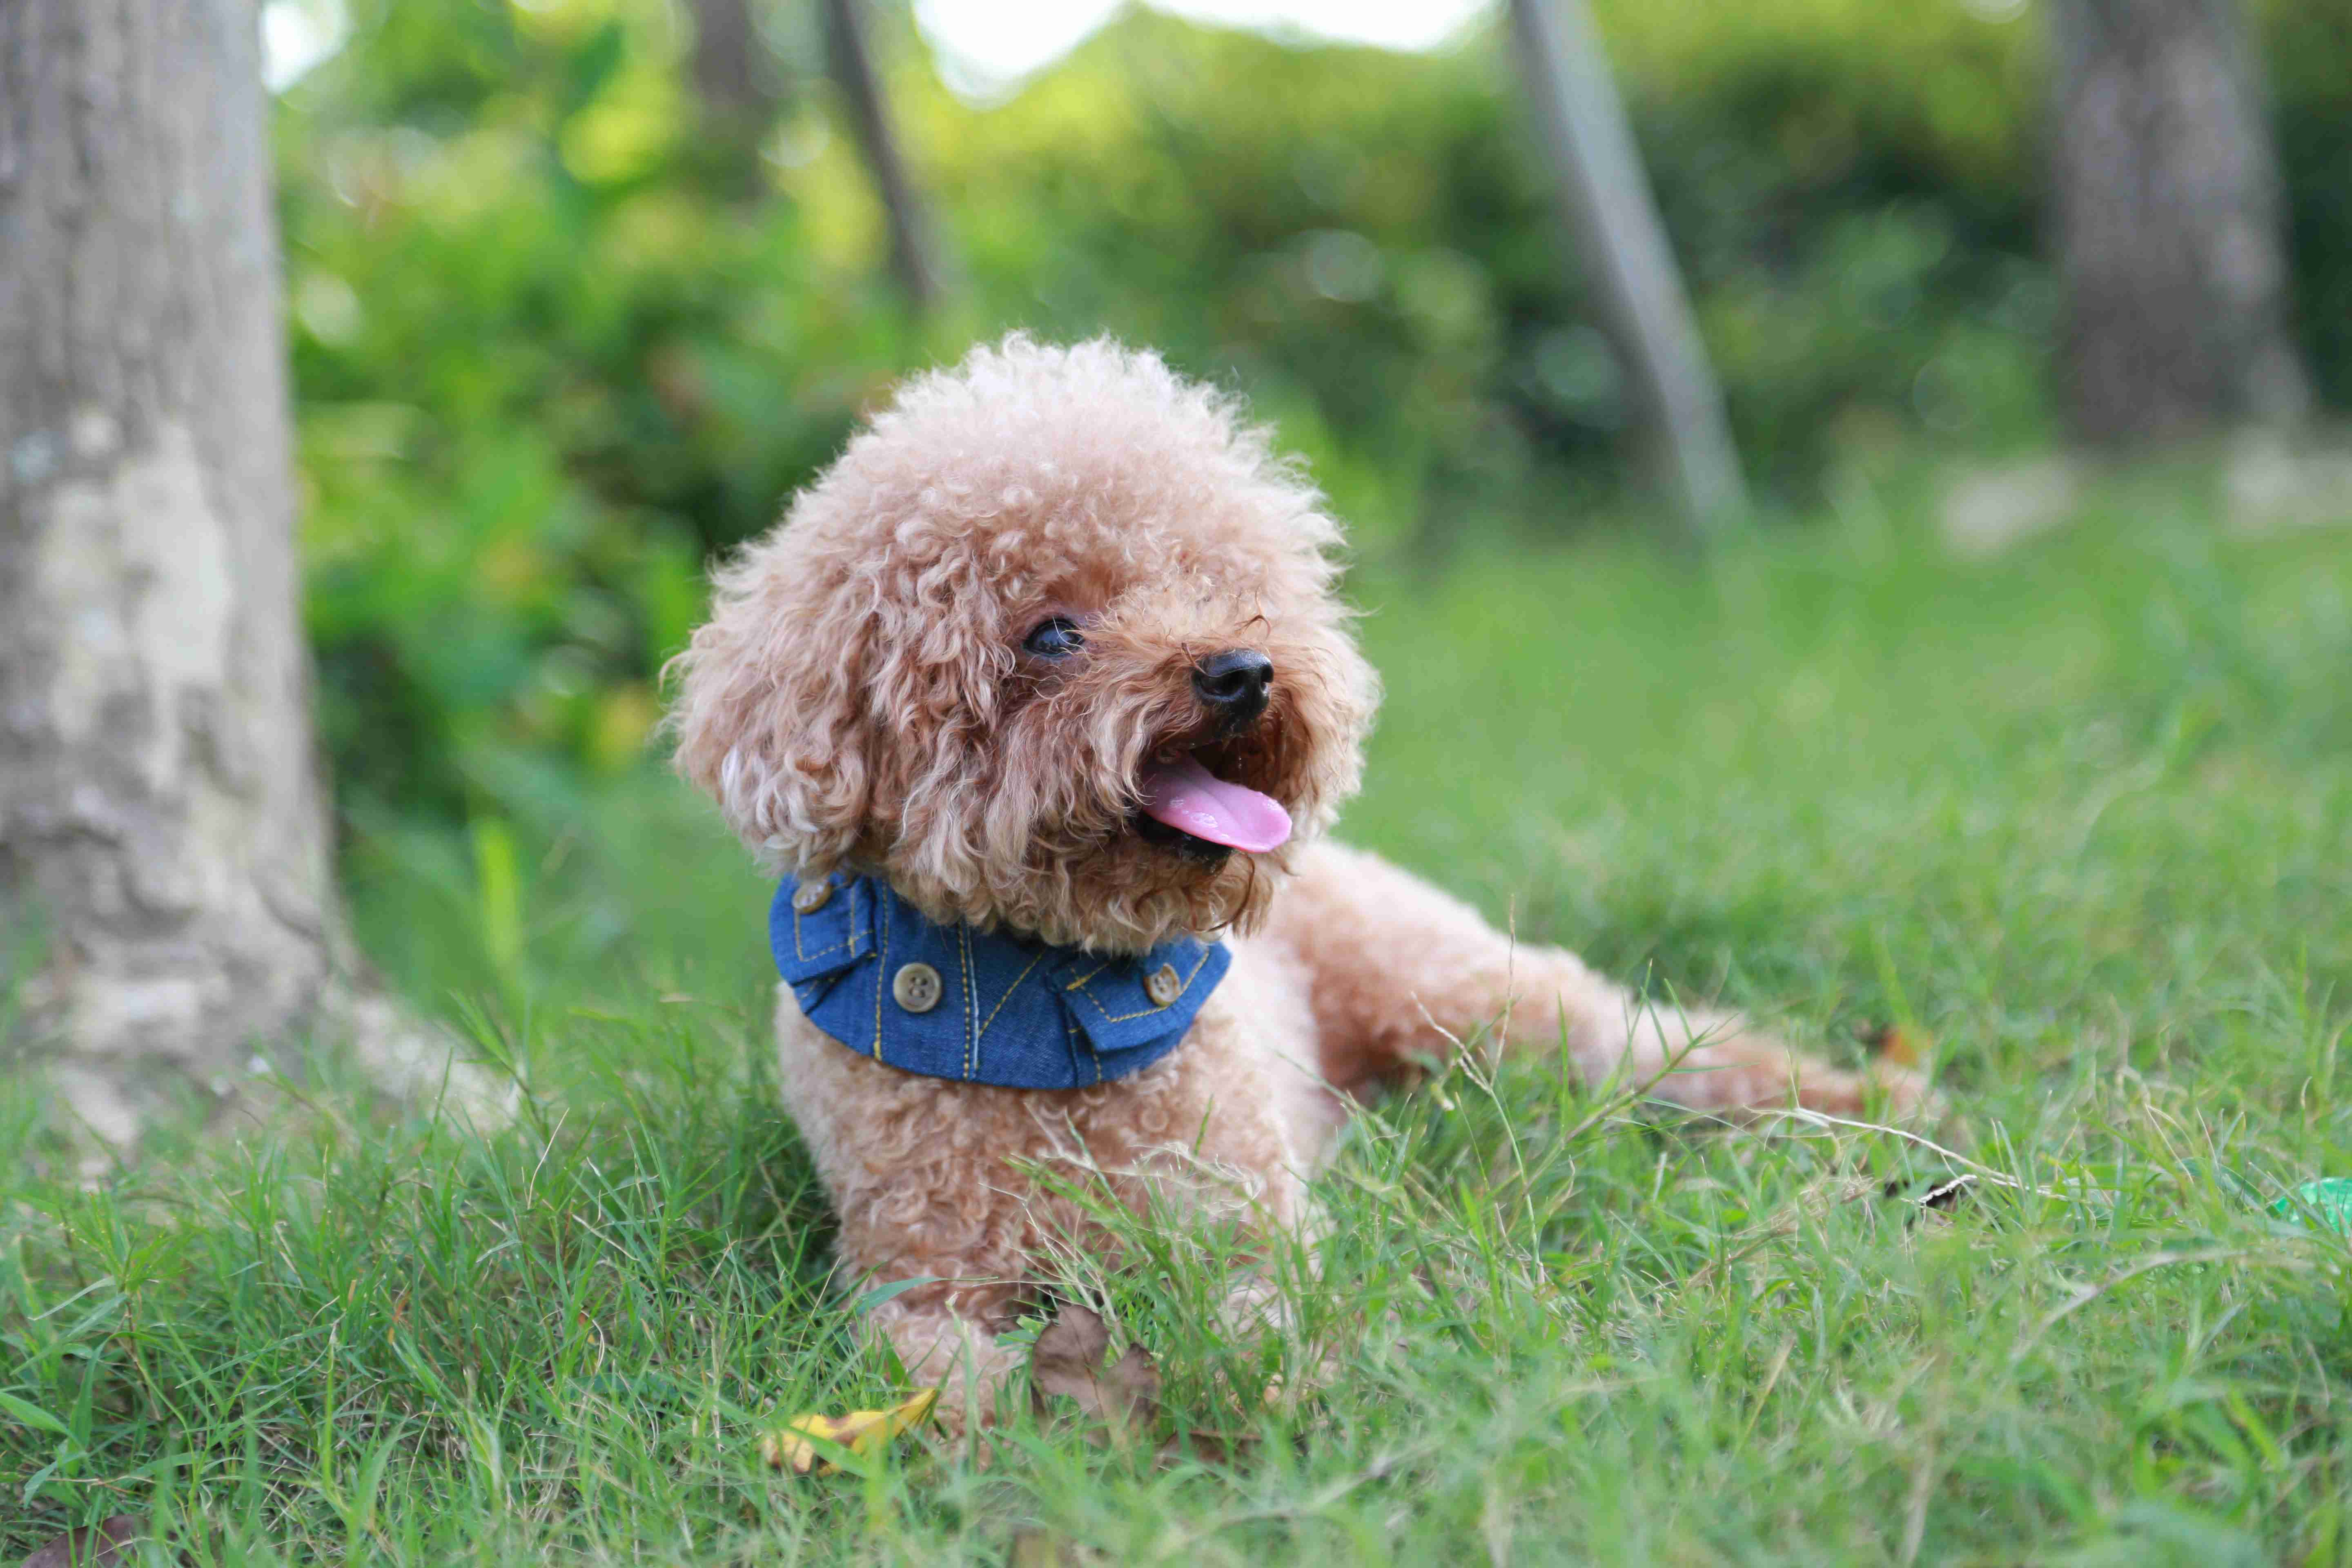 What are some preventive measures that can be taken to maintain the overall health of Poodle dog breeds?